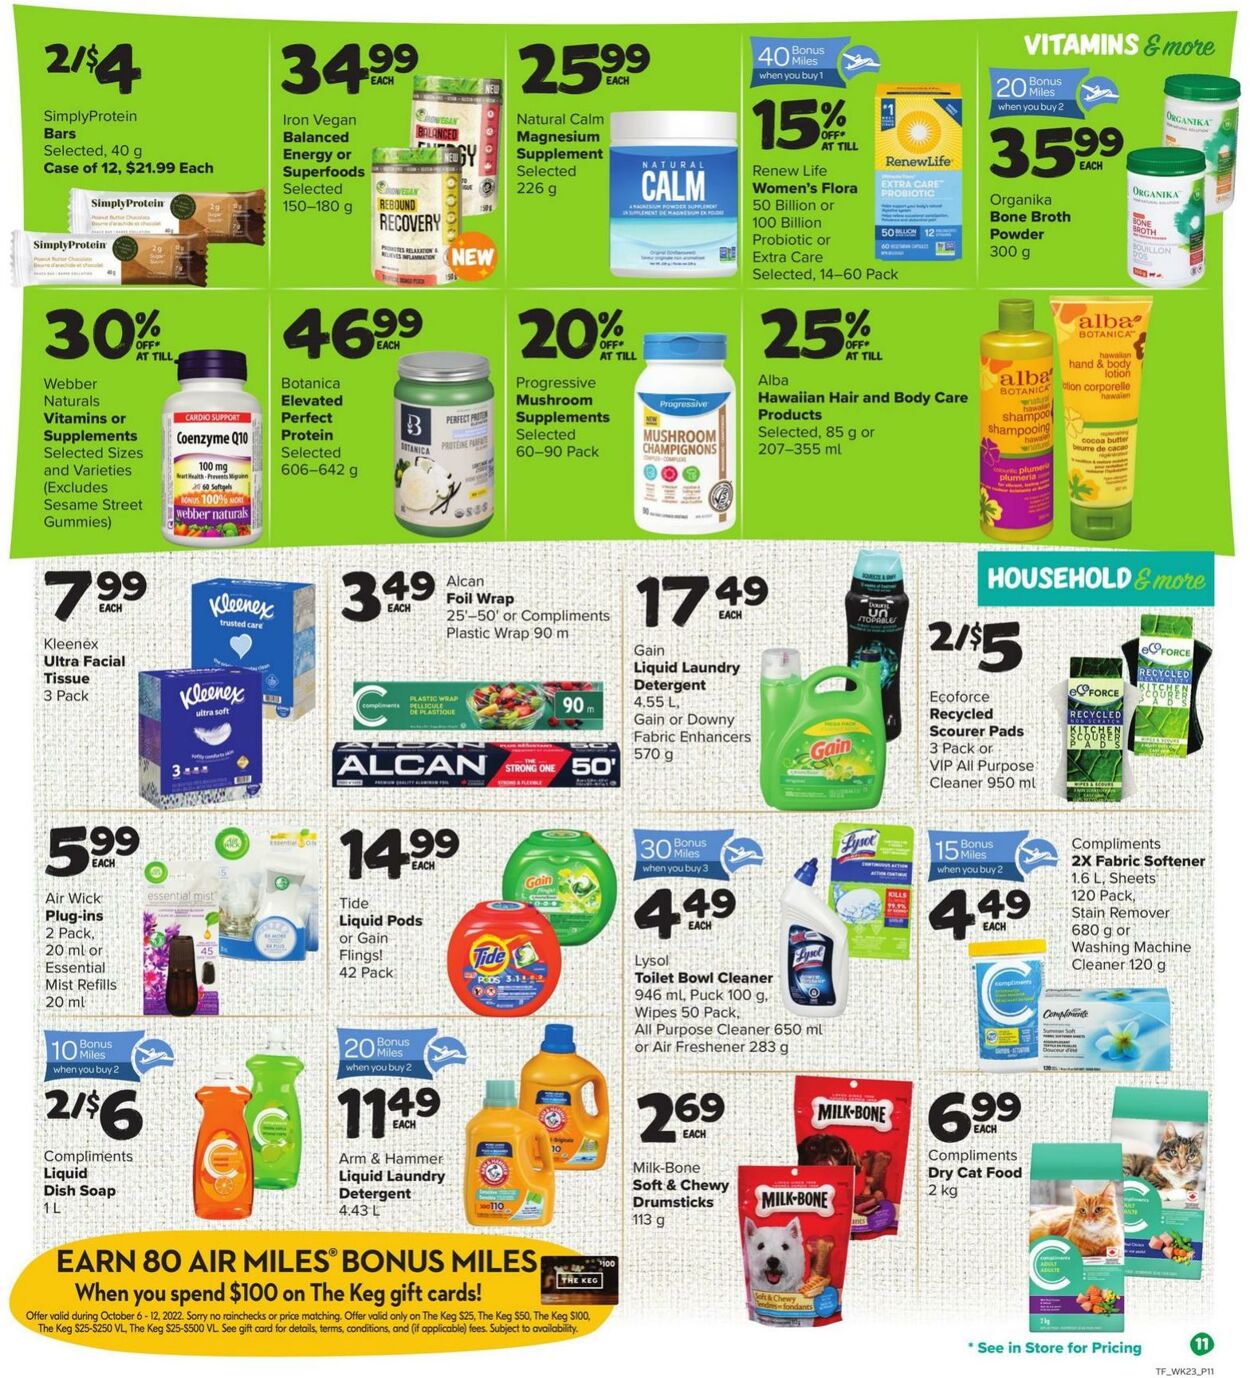 Flyer Thrifty Foods 06.10.2022 - 12.10.2022